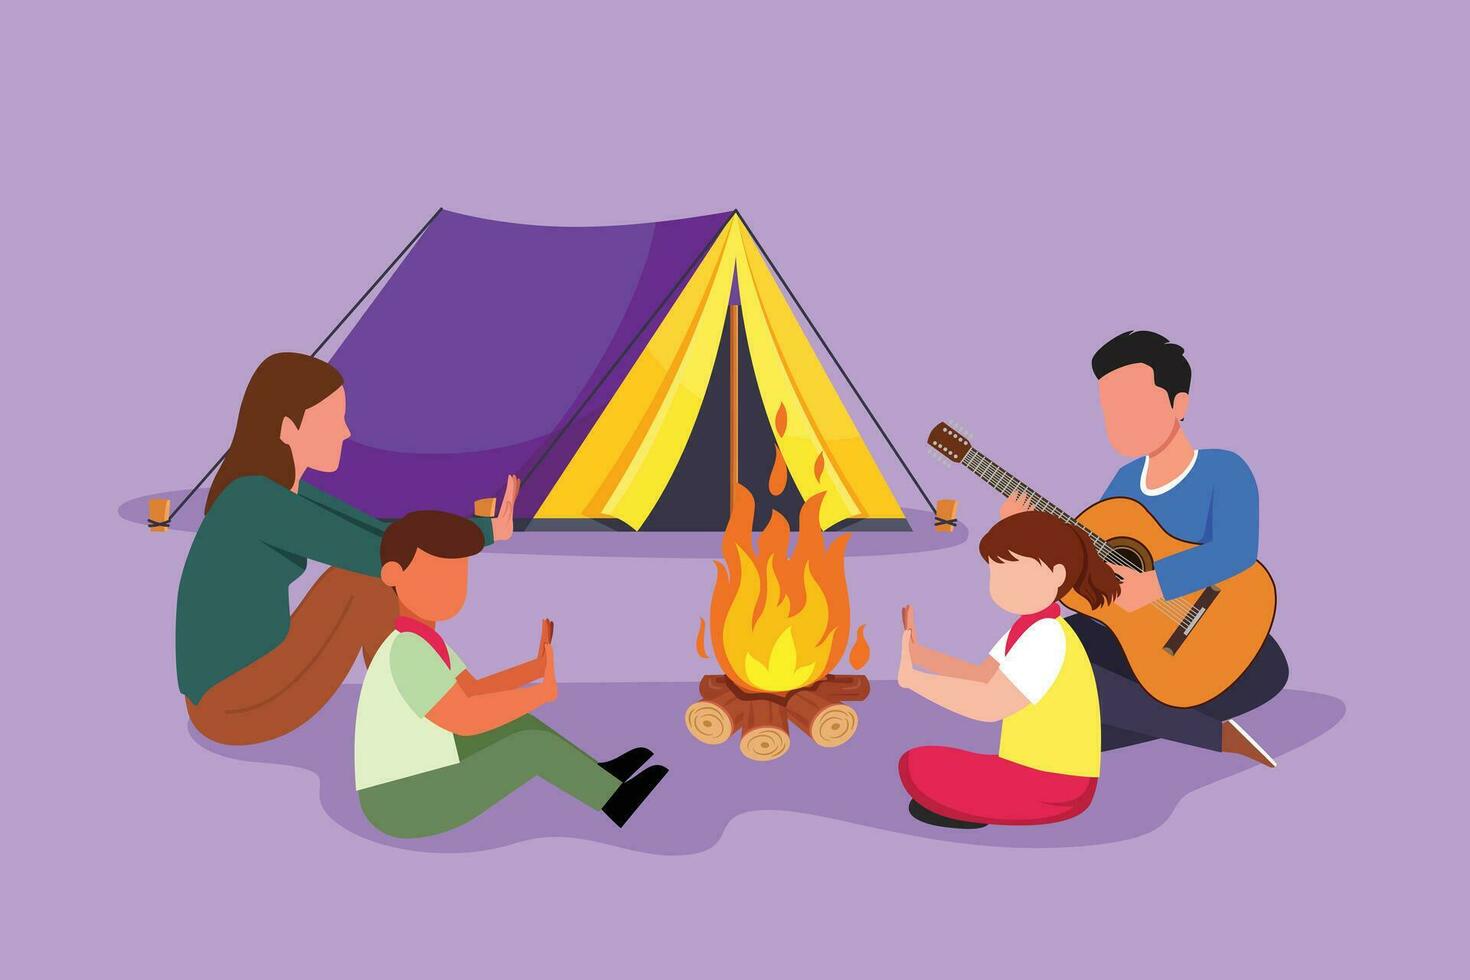 Cartoon flat style drawing happy camping hiking family warm their bodies around campfire tents. Dad playing guitar, mom and kids sitting on ground and sing a song. Graphic design vector illustration